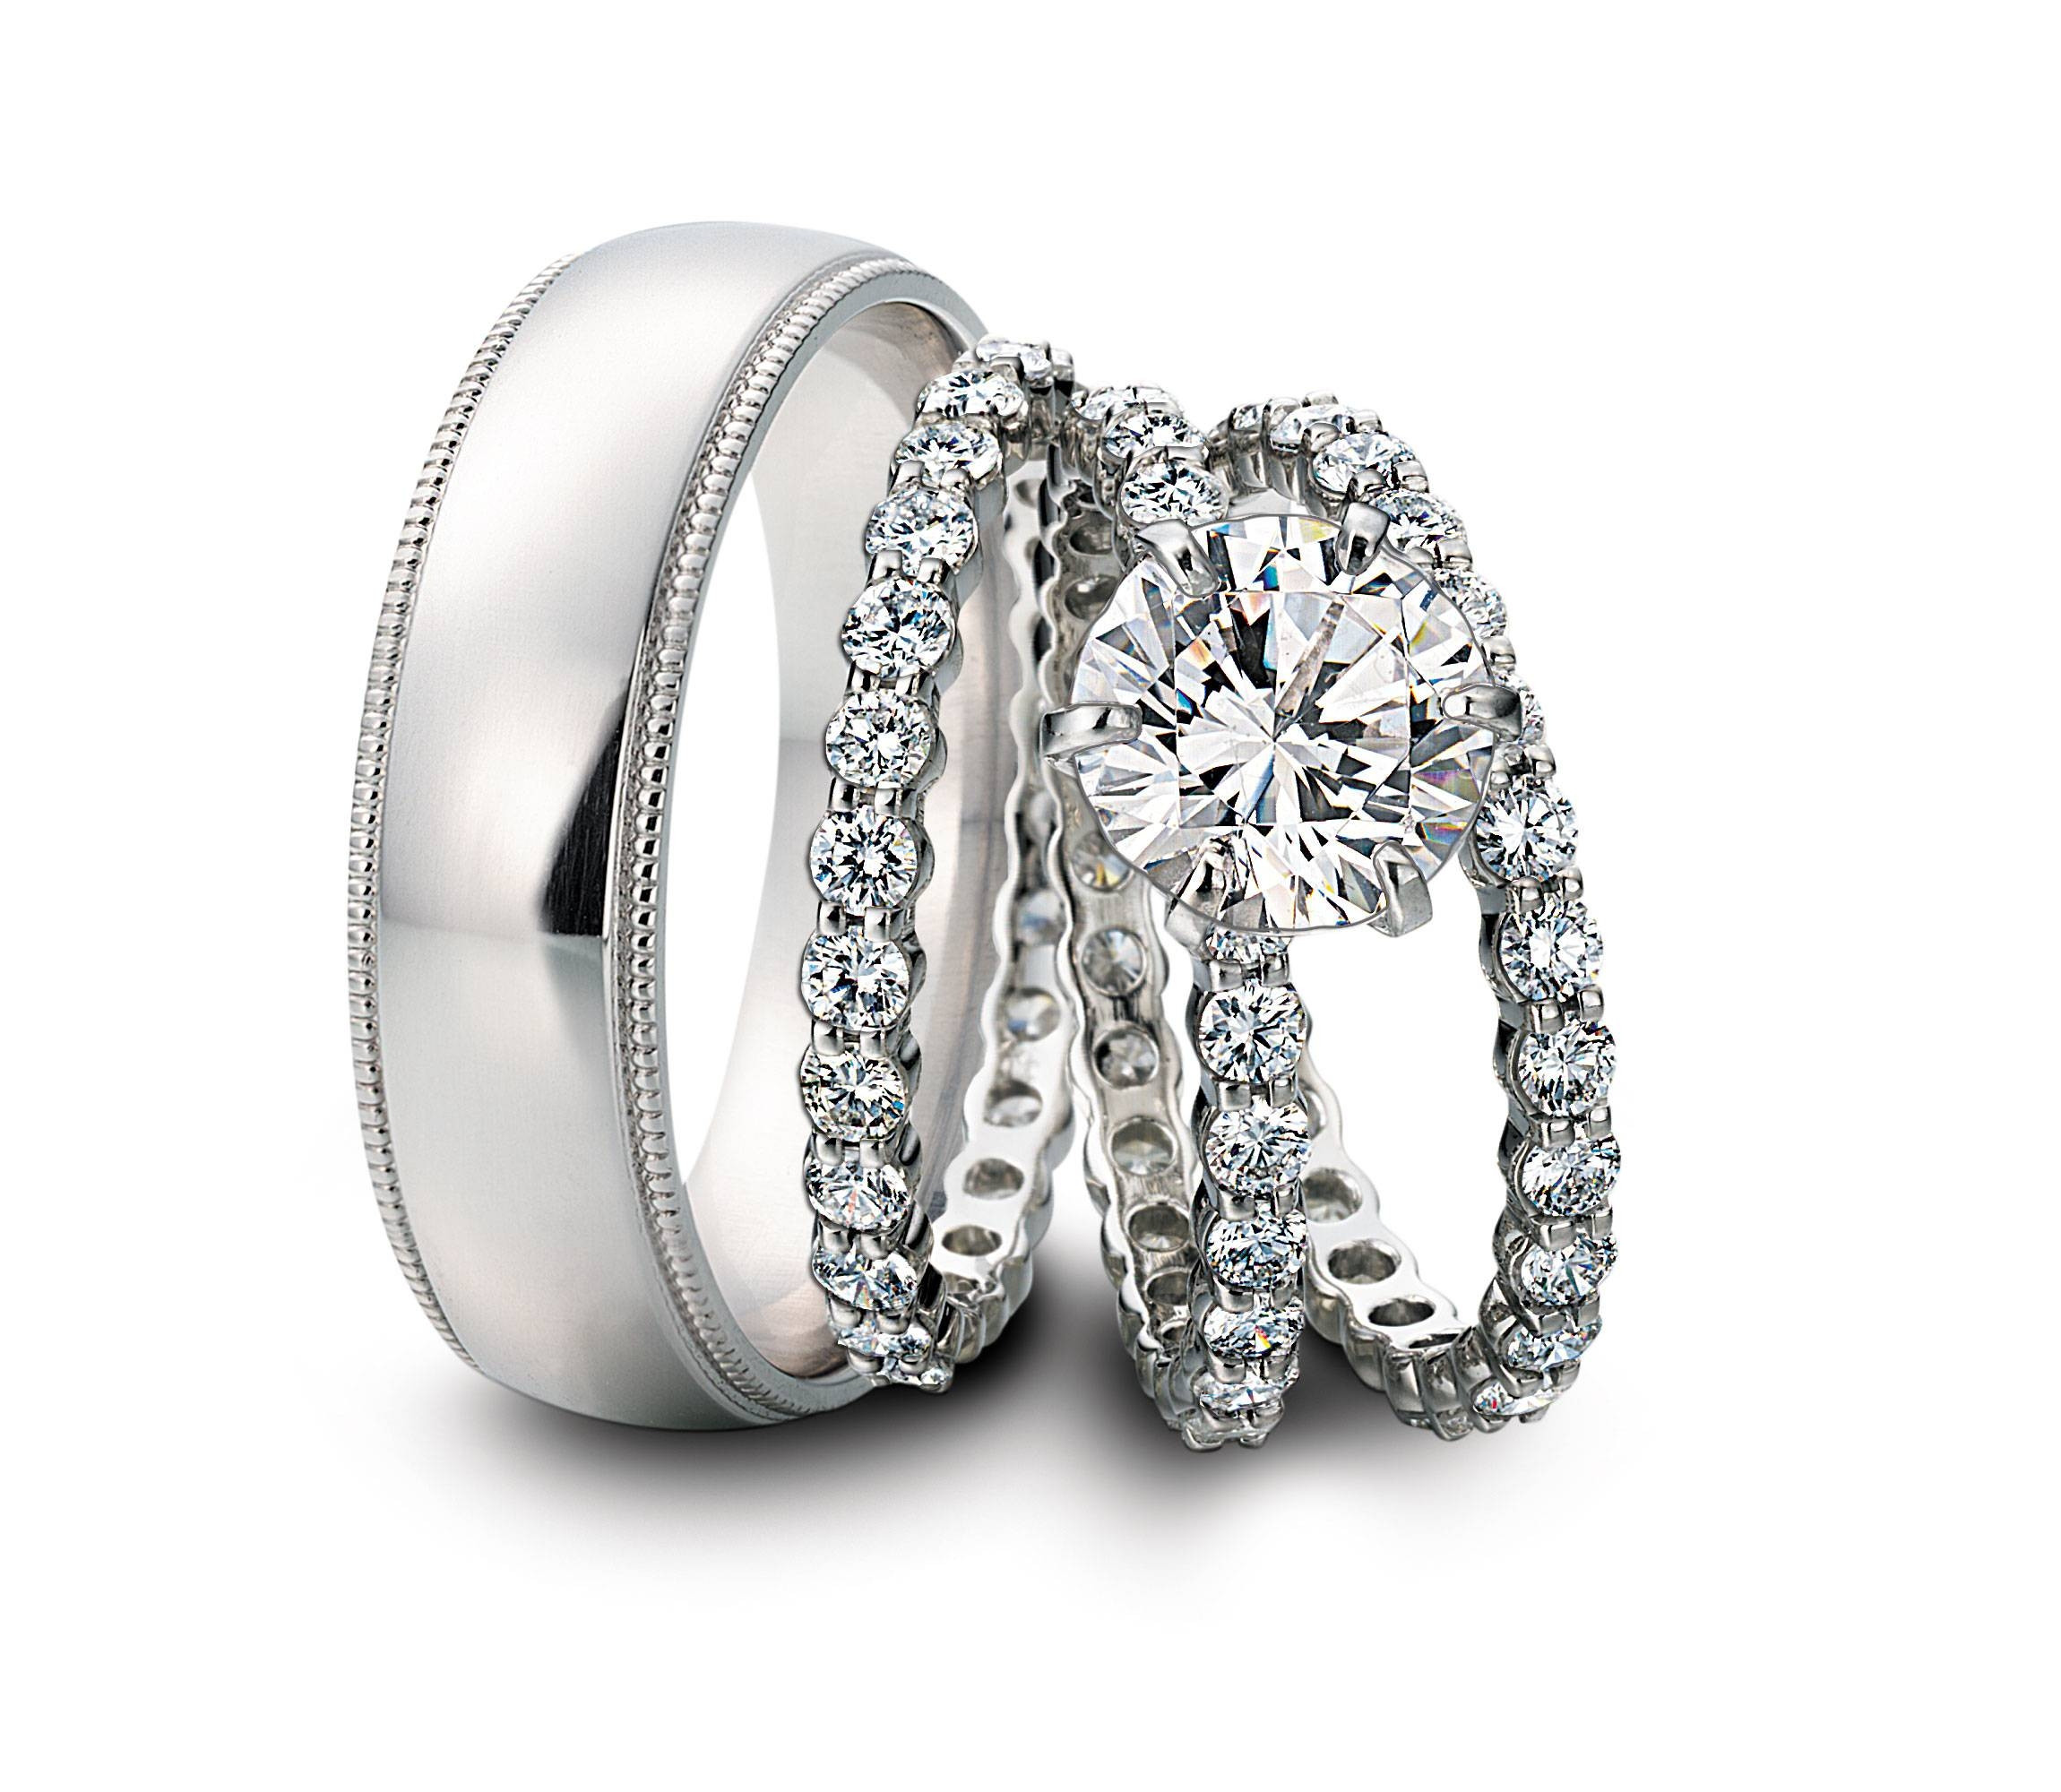 Unique Wedding Band Sets His And Hers
 15 Inspirations of Cheap Wedding Bands Sets His And Hers